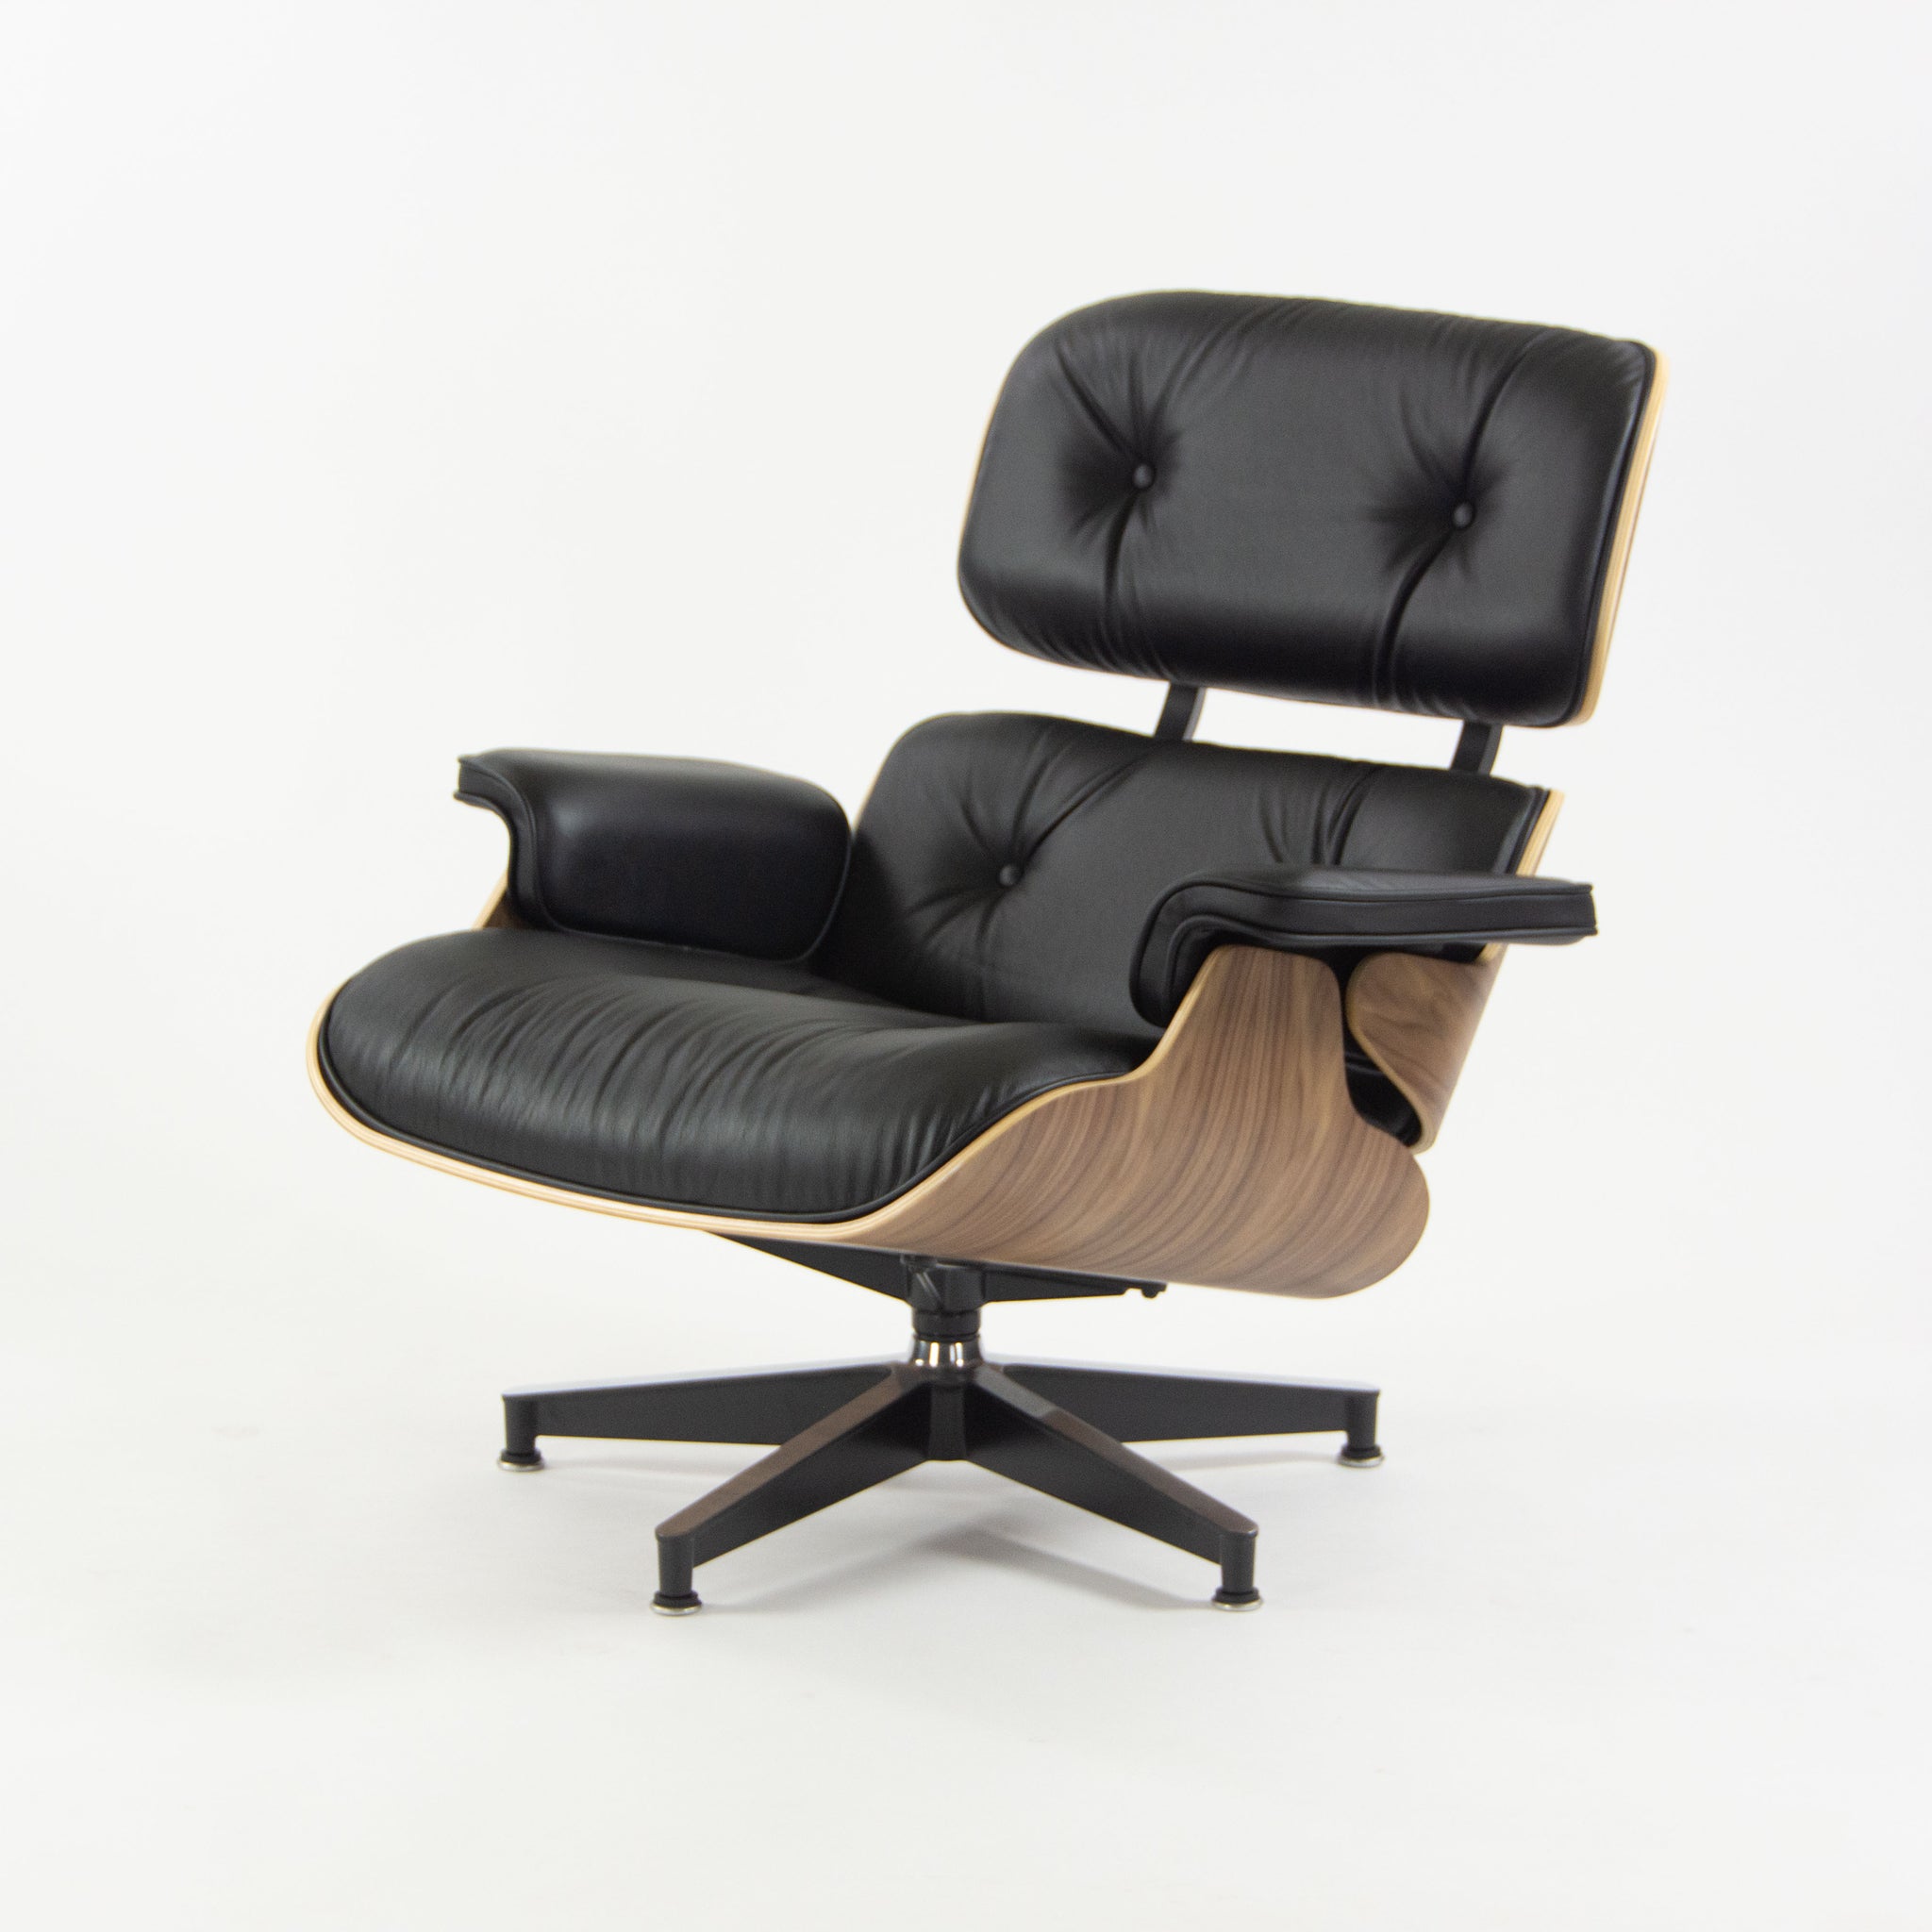 SOLD Herman Miller 2019 Brand New Eames Lounge Chair and Ottoman Walnut Black Leather